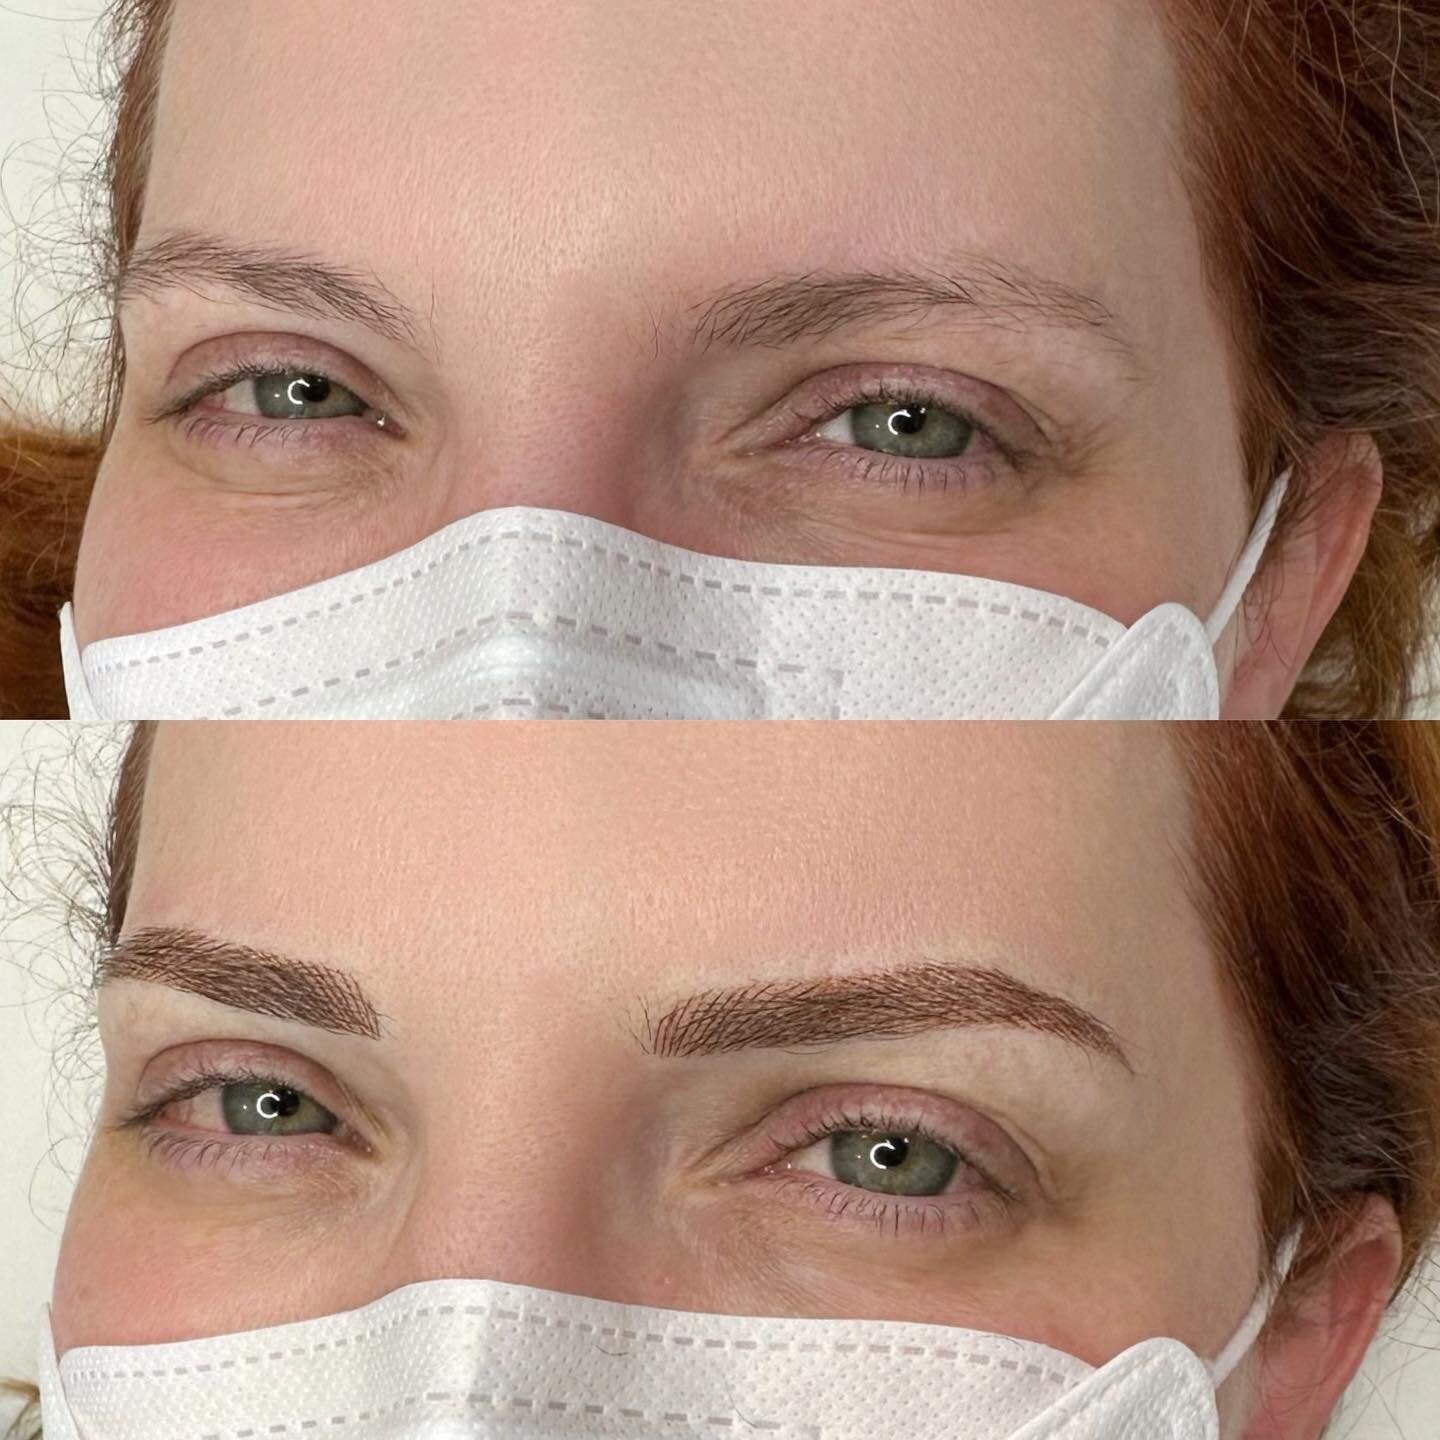 Nano feather brows for red hair🥰✨
&mdash;
Skin type: Combination
Technique: Nano Feather Brows
Pain level: None
Appointment time: 2 hours
Sessions: 2 required
Healing time: 7-10 days (no scabbing)
Last: 2-3 years (depends on skin type)
&mdash;
For p